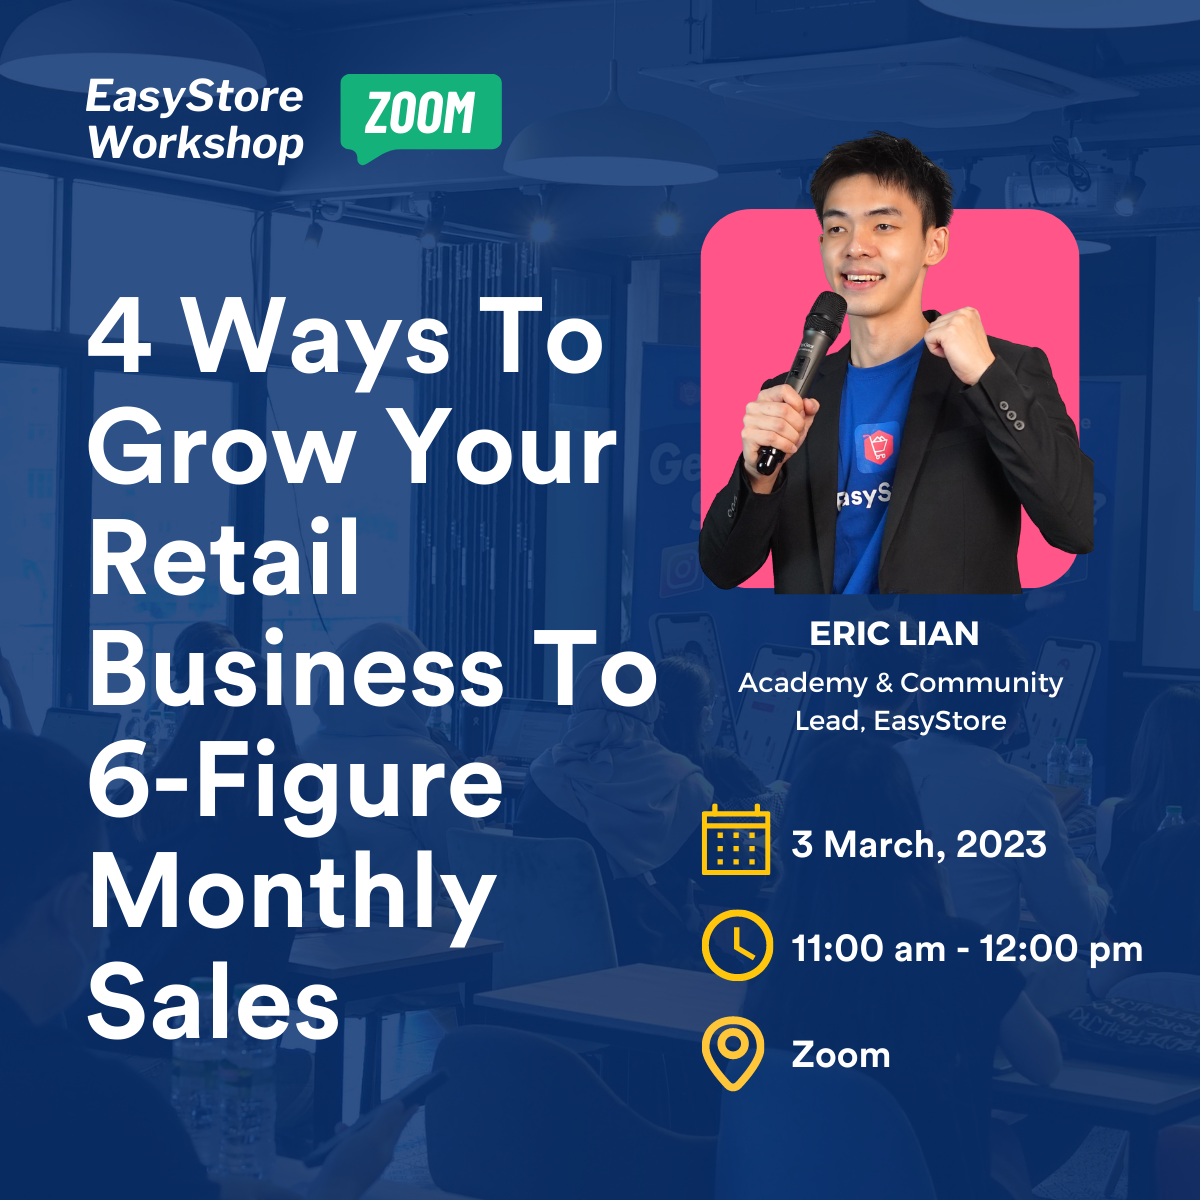 4 Ways to Grow Your Retail To 6-Figure Monthly Sales | EasyStore